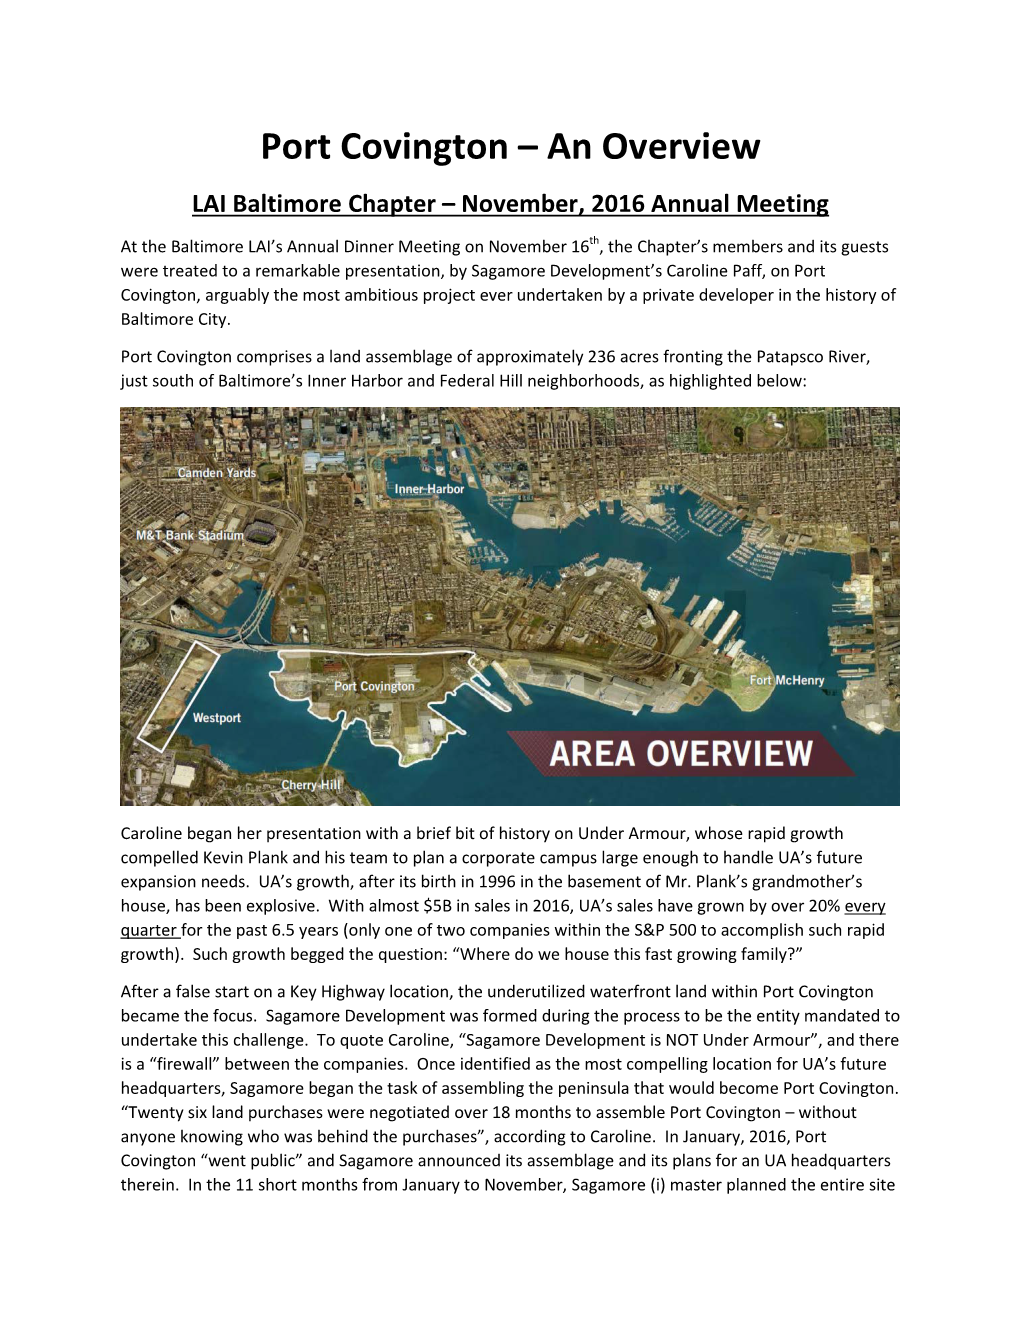 Port Covington – an Overview LAI Baltimore Chapter – November, 2016 Annual Meeting